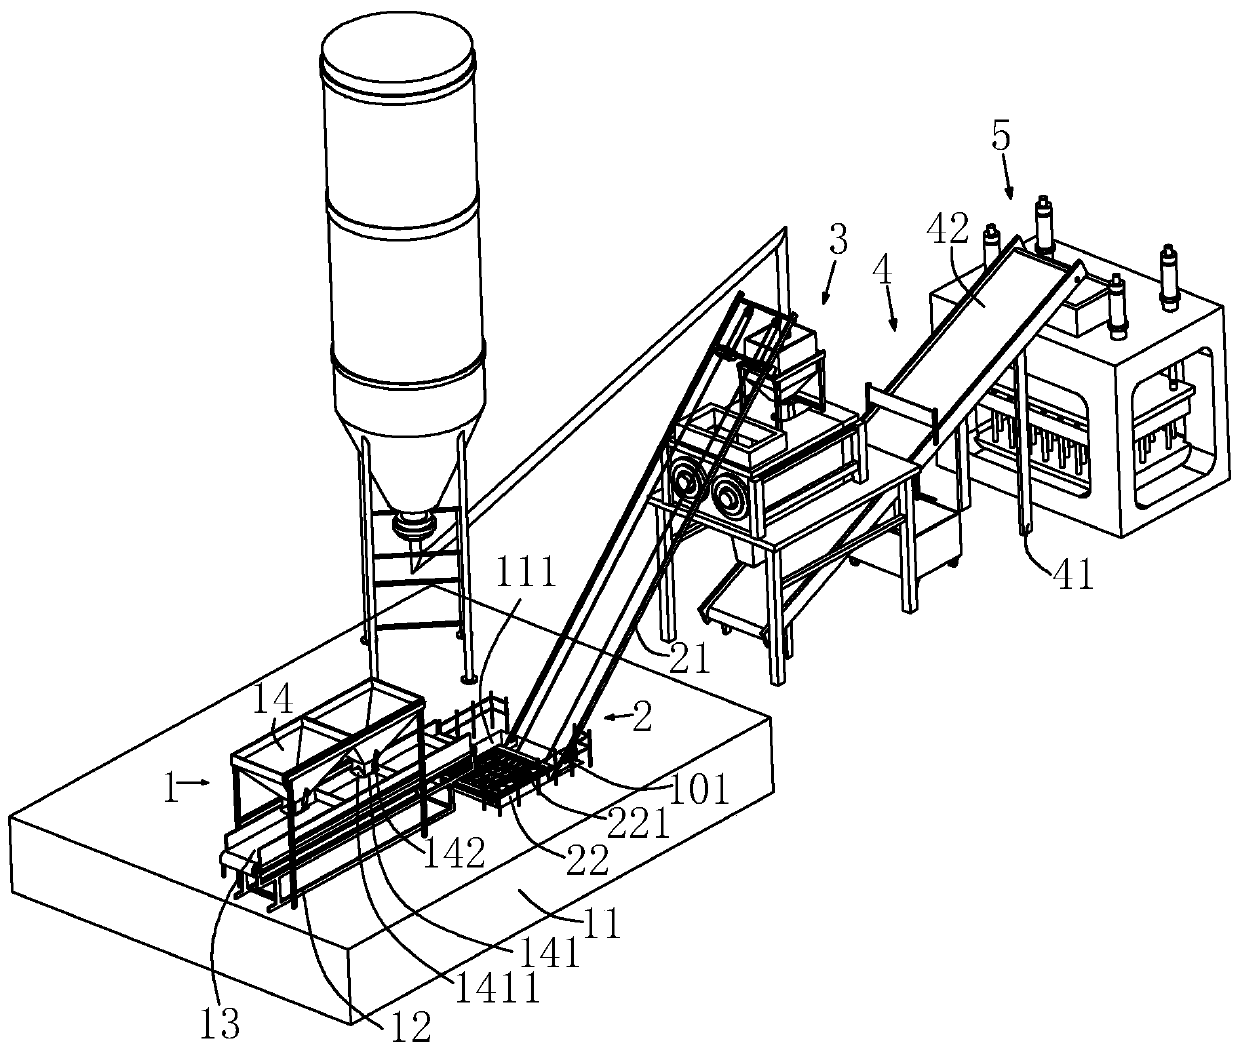 Brick production equipment for construction waste recycling